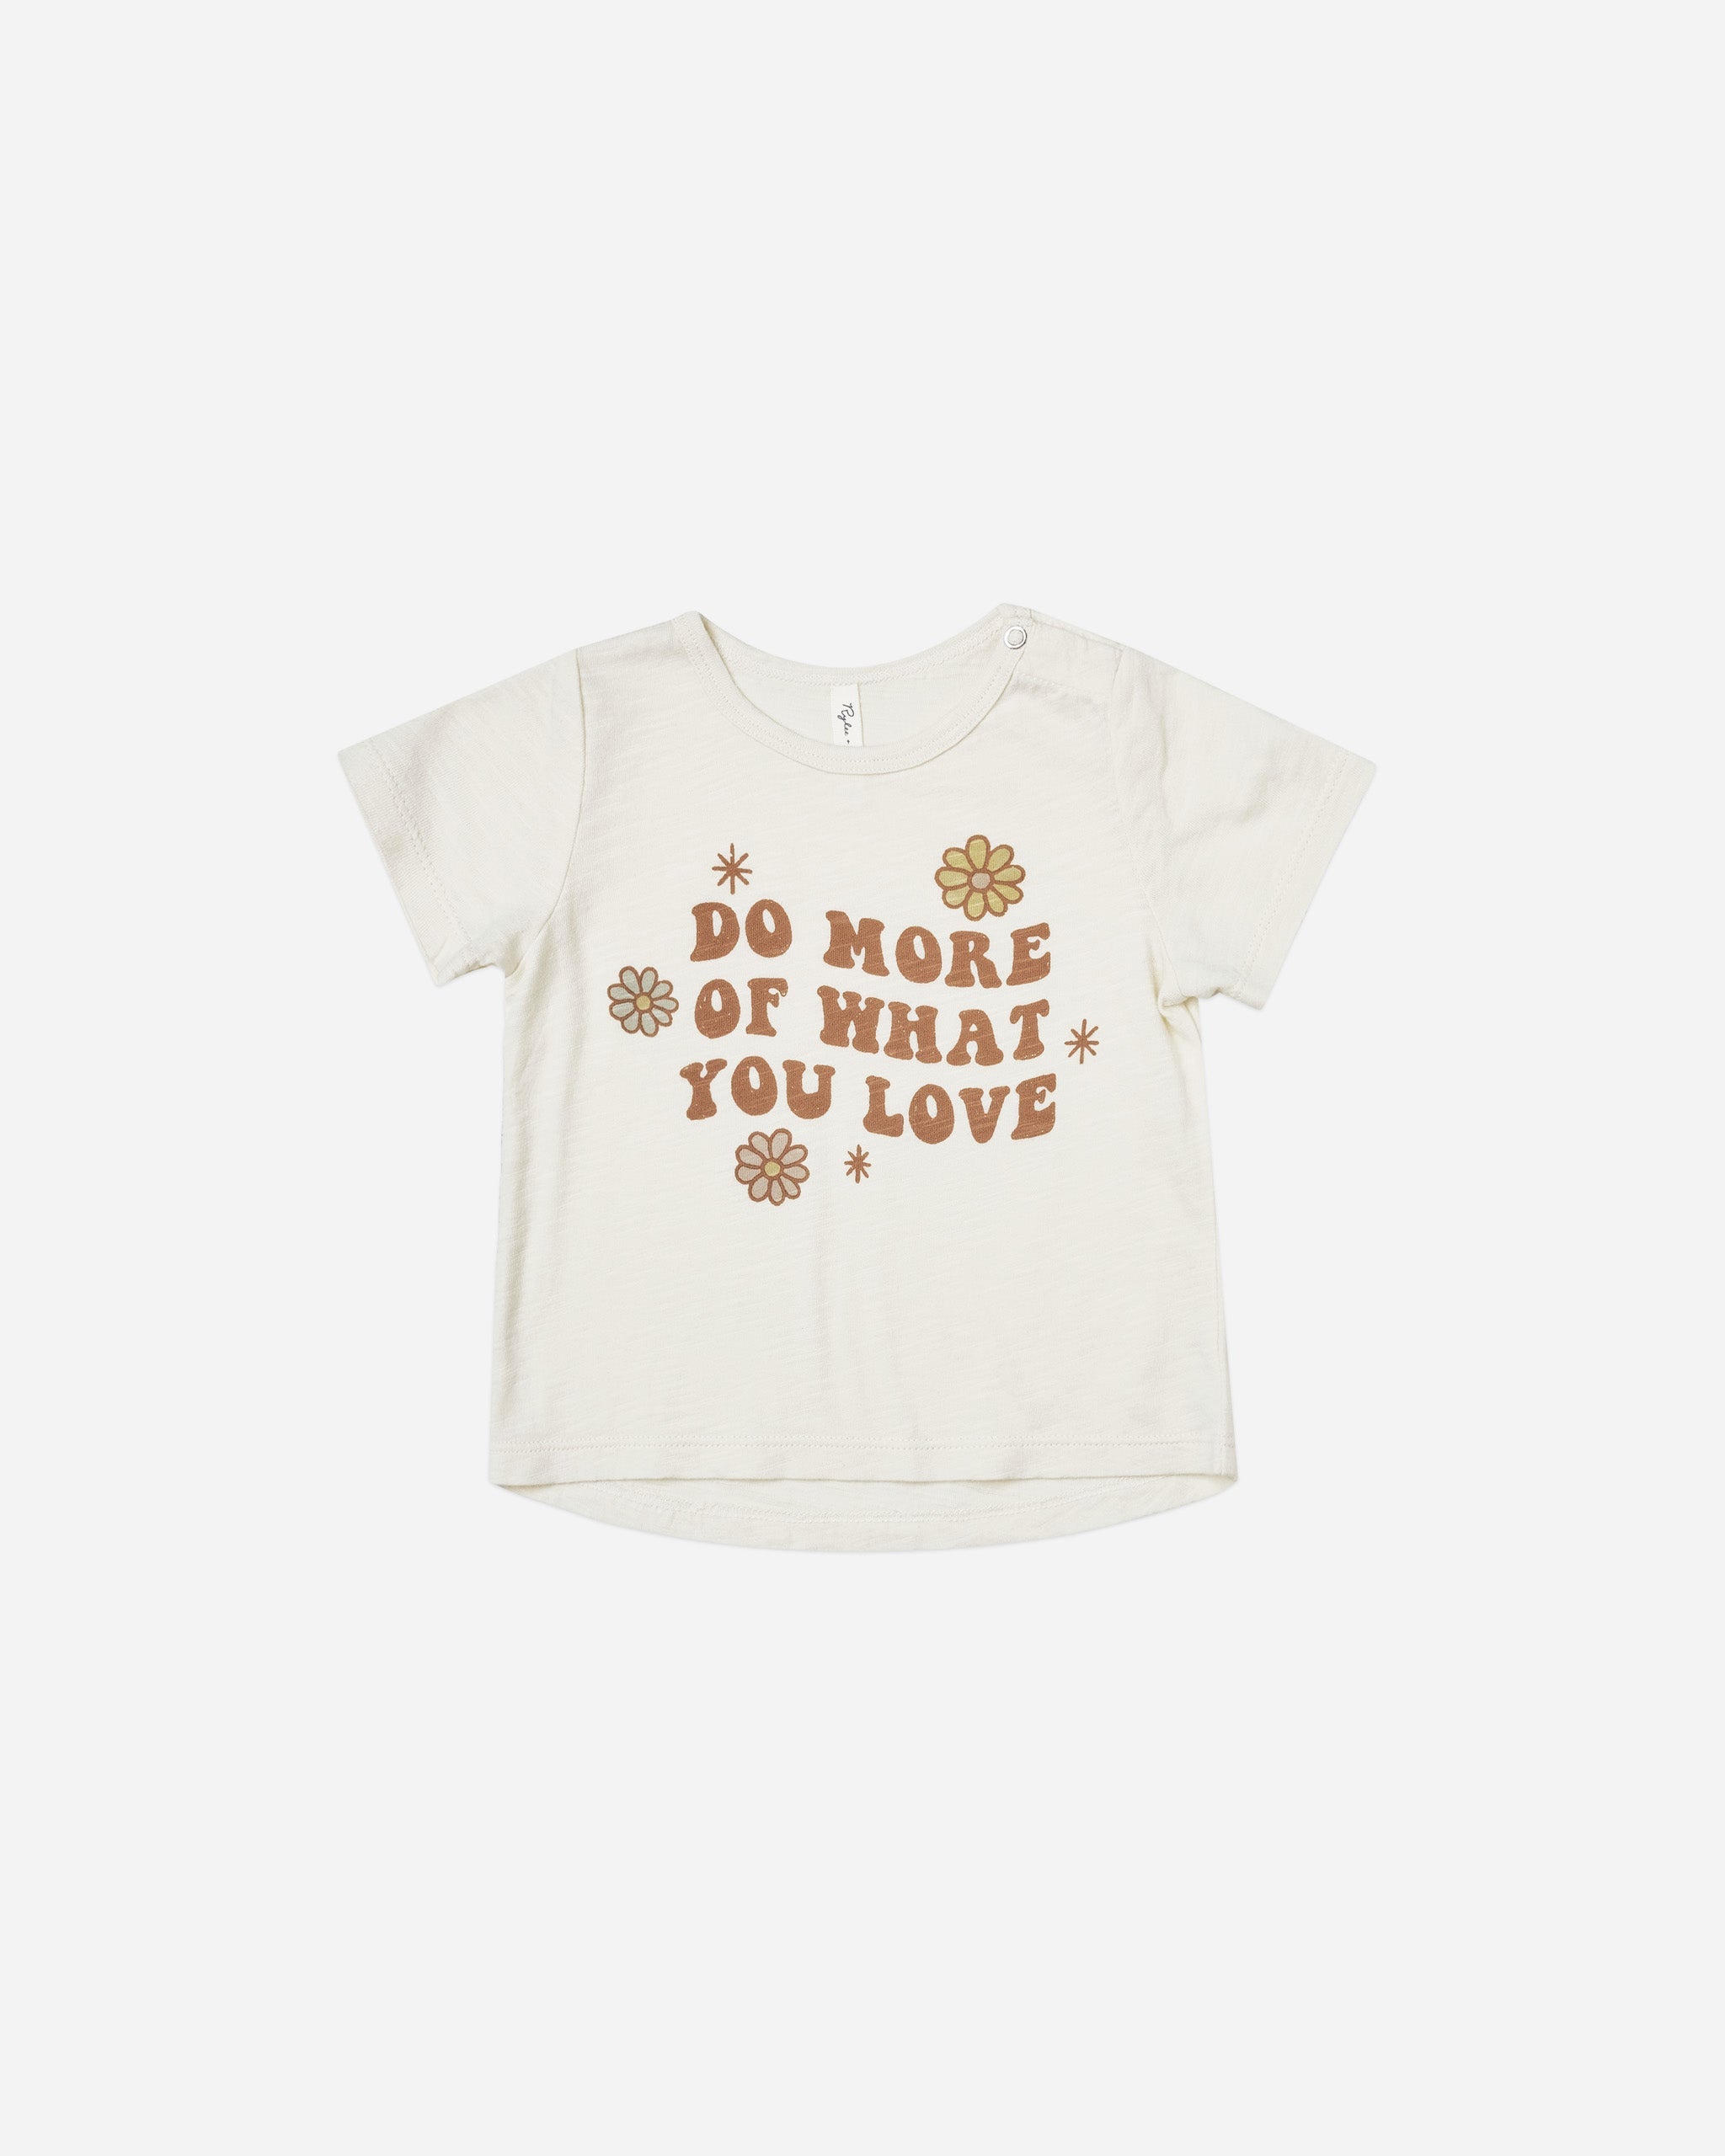 basic tee || love - Rylee + Cru | Kids Clothes | Trendy Baby Clothes | Modern Infant Outfits |